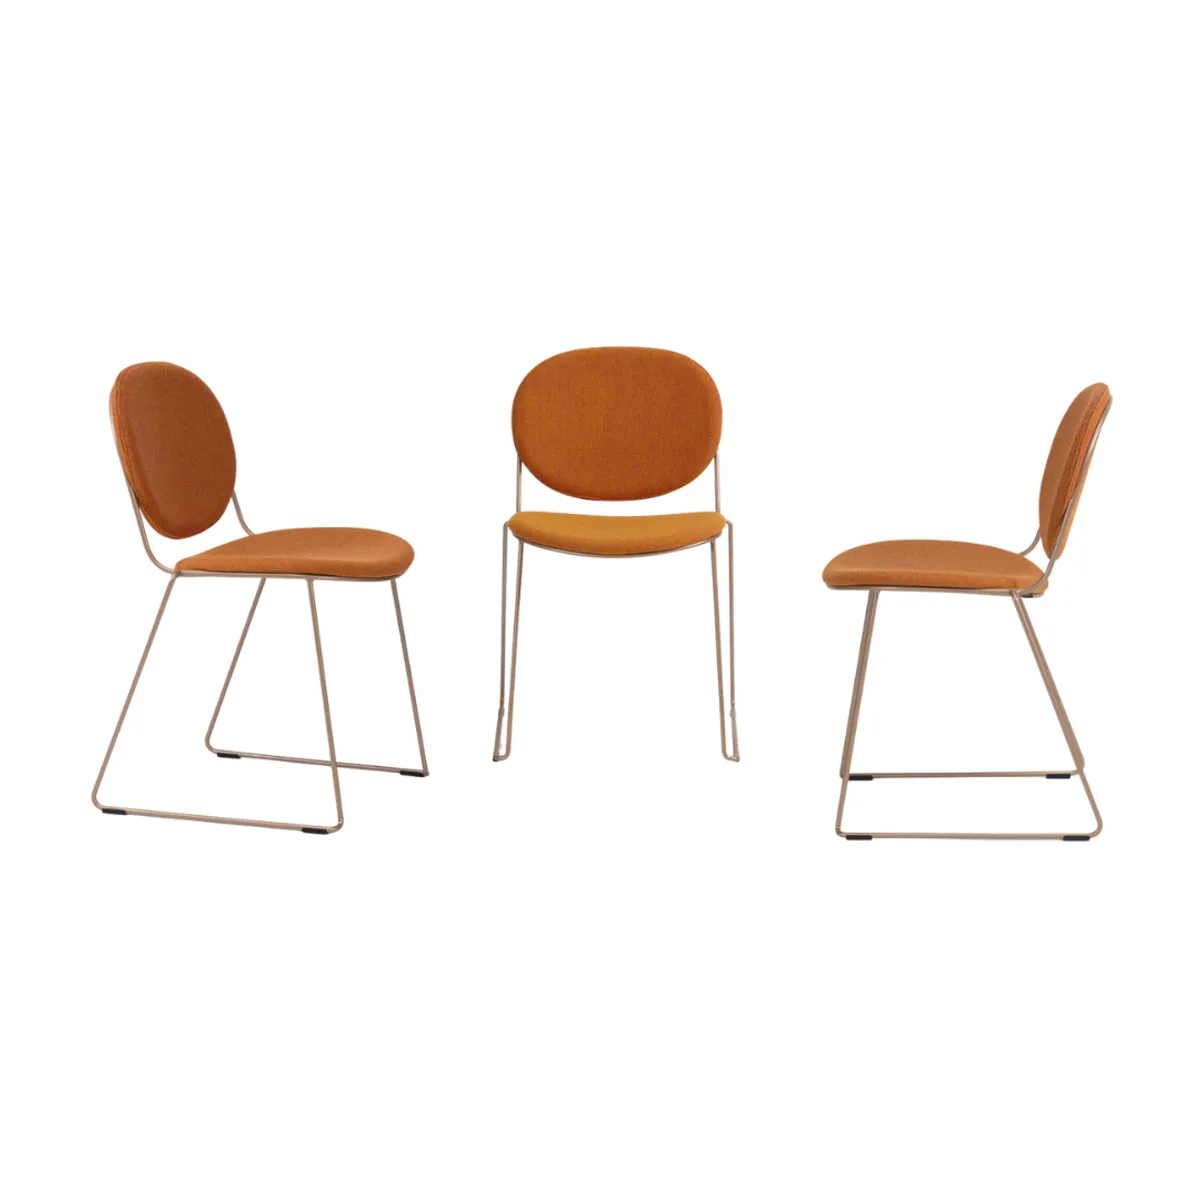 Timo stacking chair 8